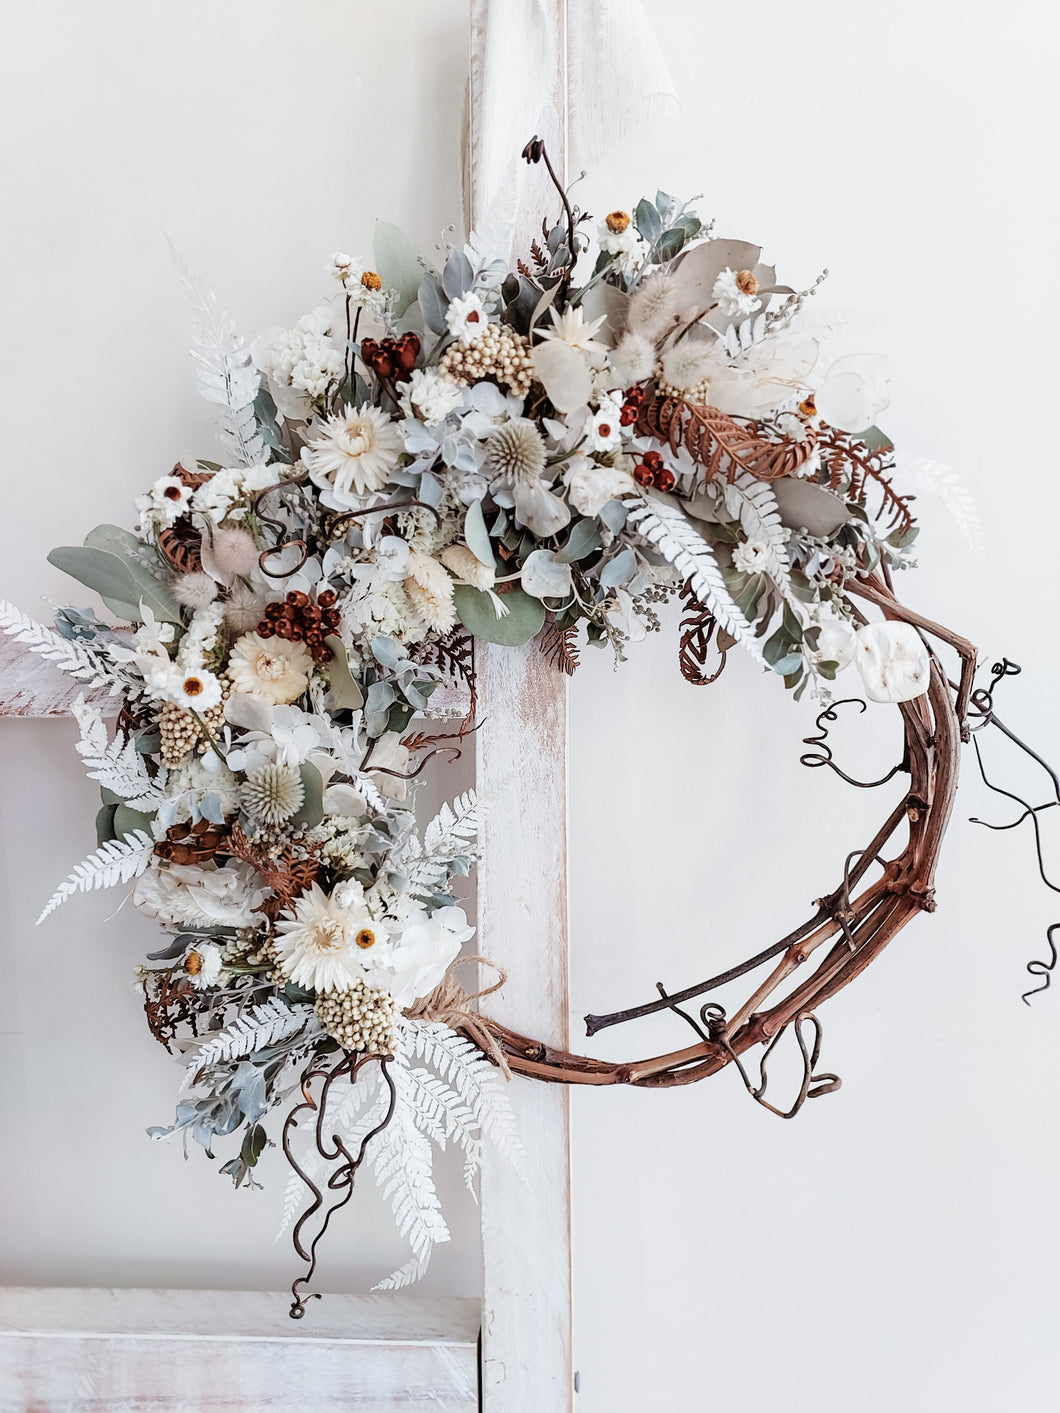 Dried flower wreath in natural tones on a grapevine base – close full view.